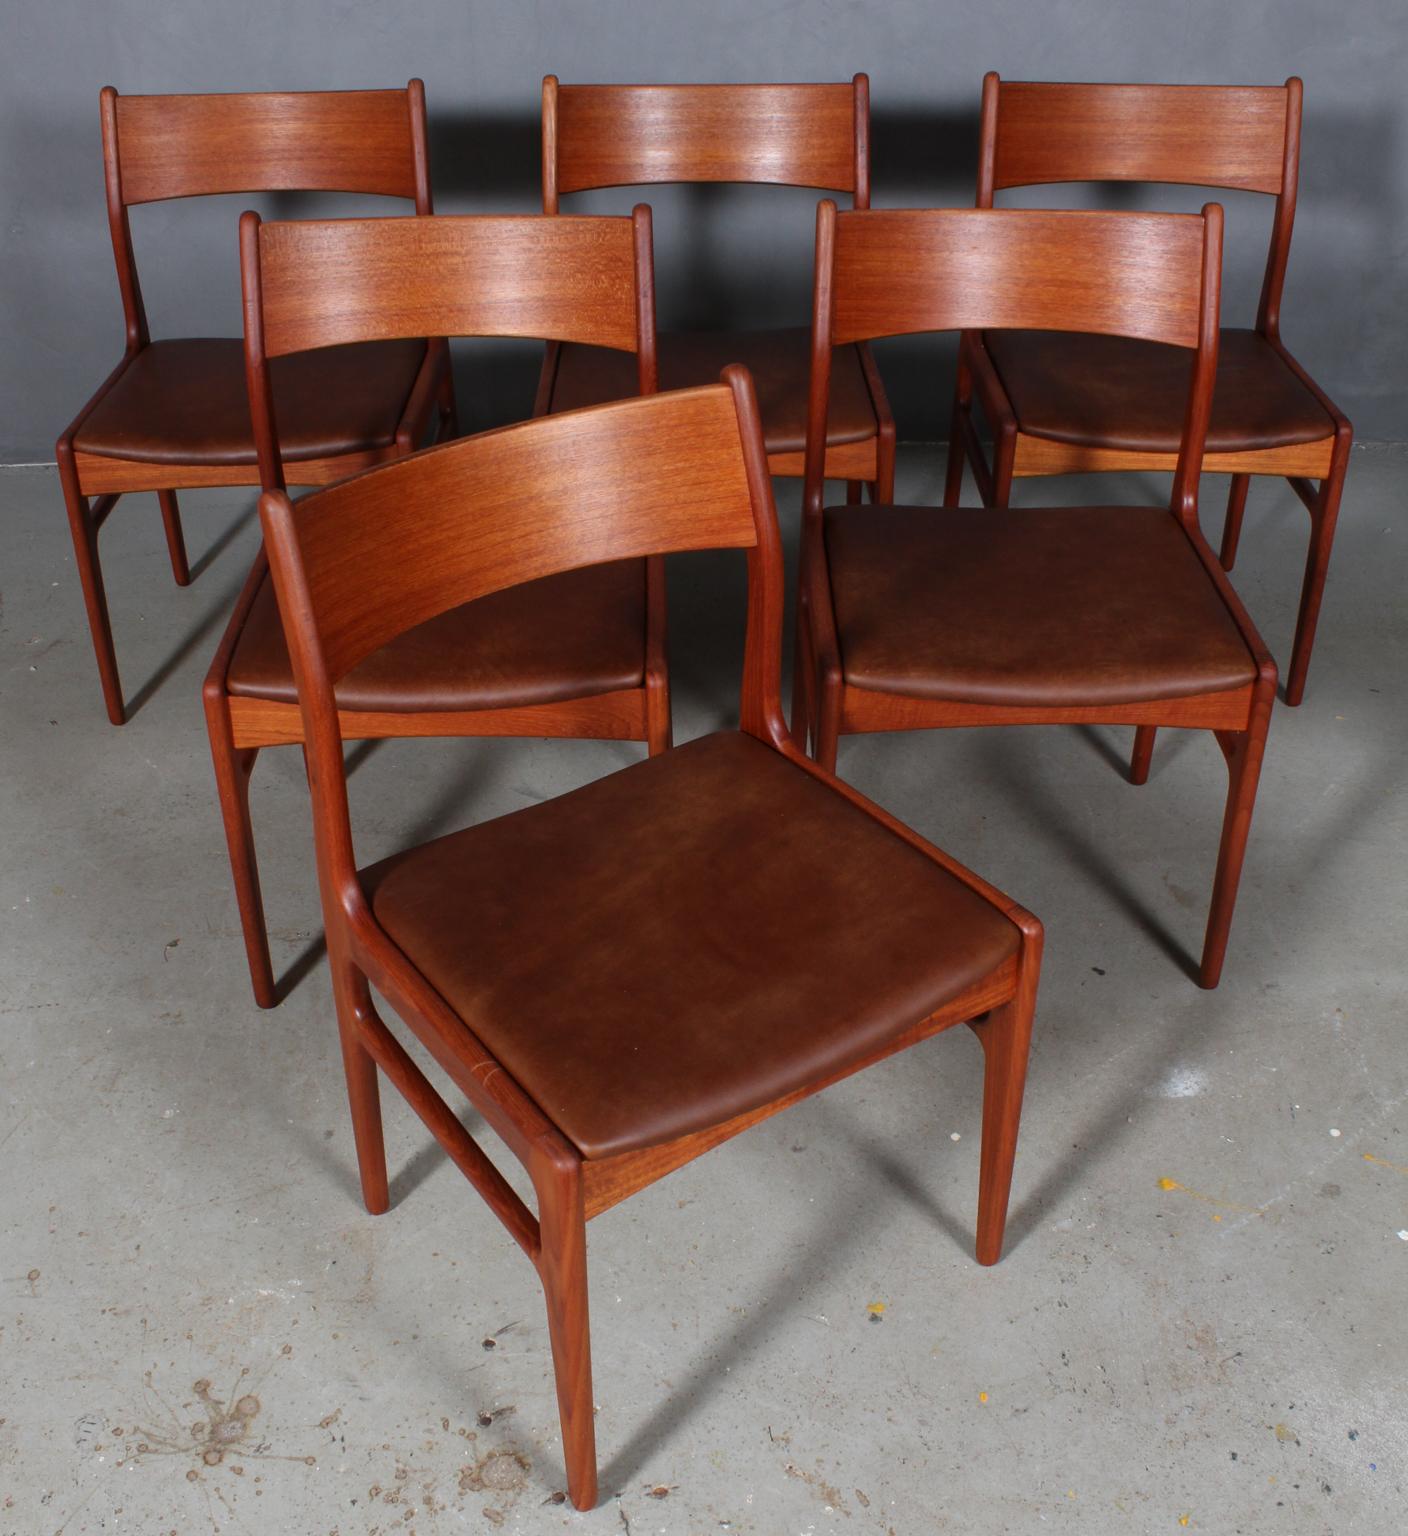 Funder-Schmidt & Madsen. Six dining chairs made of veneered and solid teak, seat later upholstered in mocha colored aniline leather, 1960s. Newly upholstered in mocha colored aniline leather with Danish upholstery in Denmark.
 
  